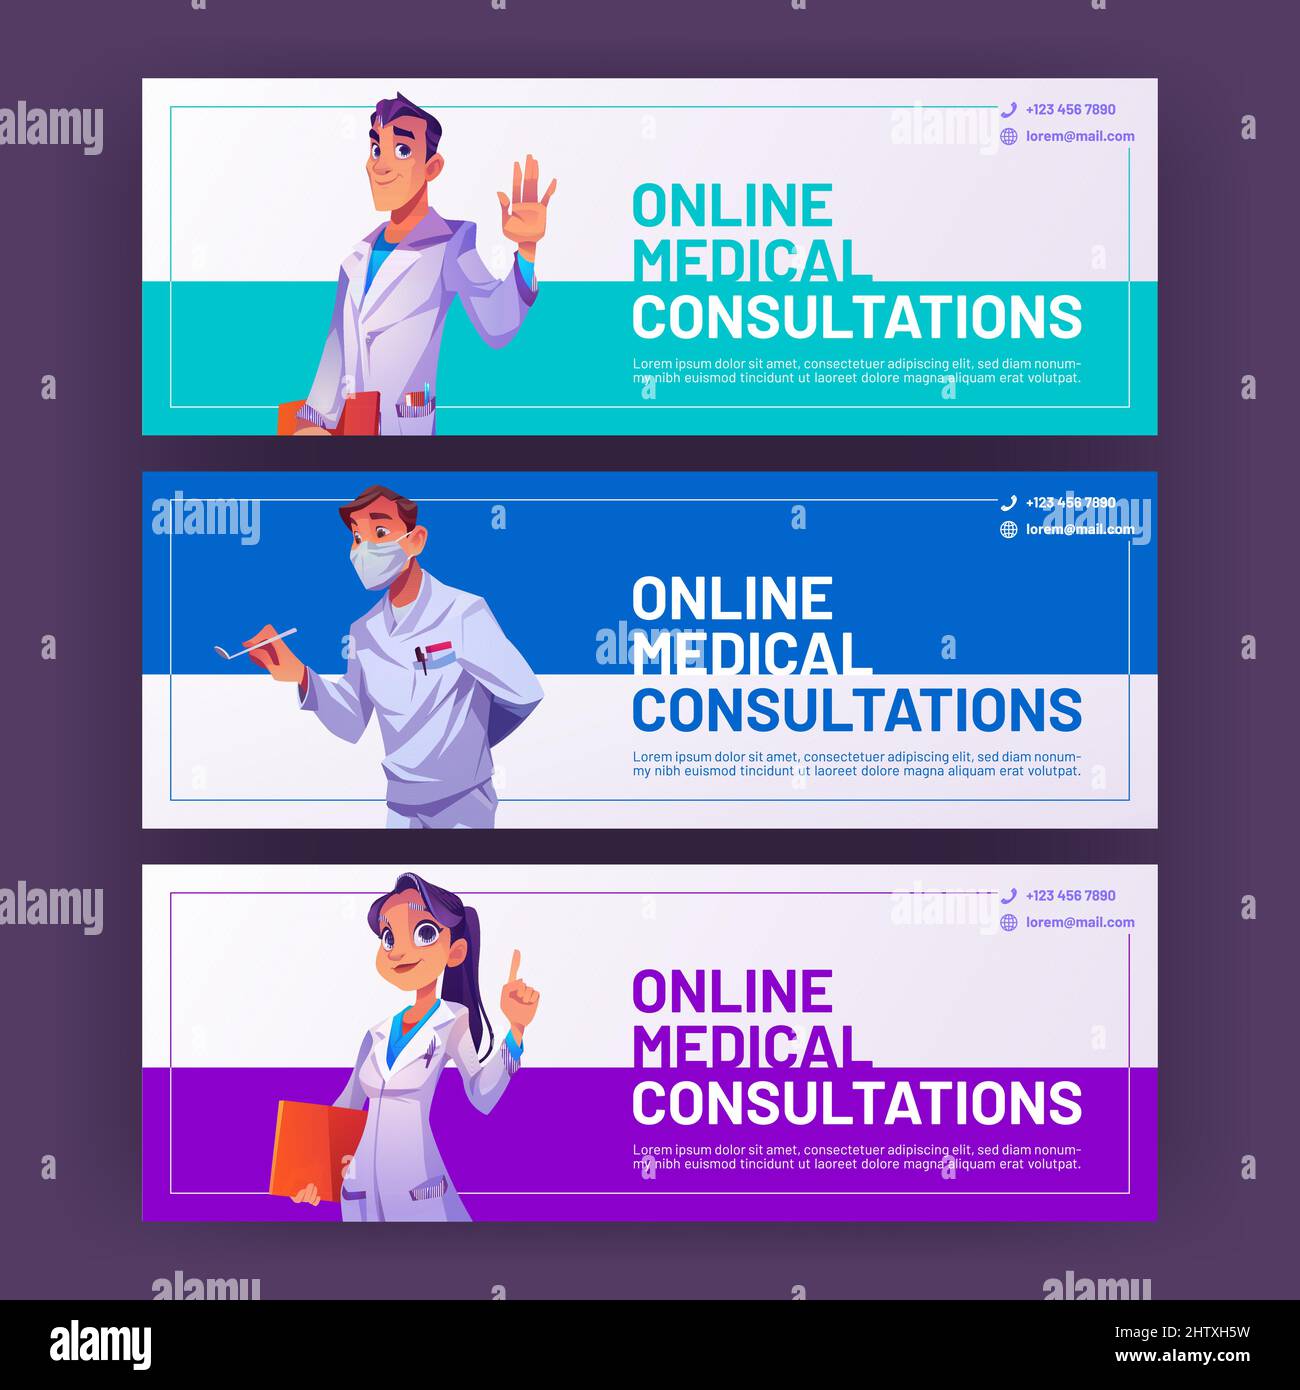 Online Medical Consultation Cartoon Ads Banners Doctors Greeting Gesturing With Hand Medicine 4766